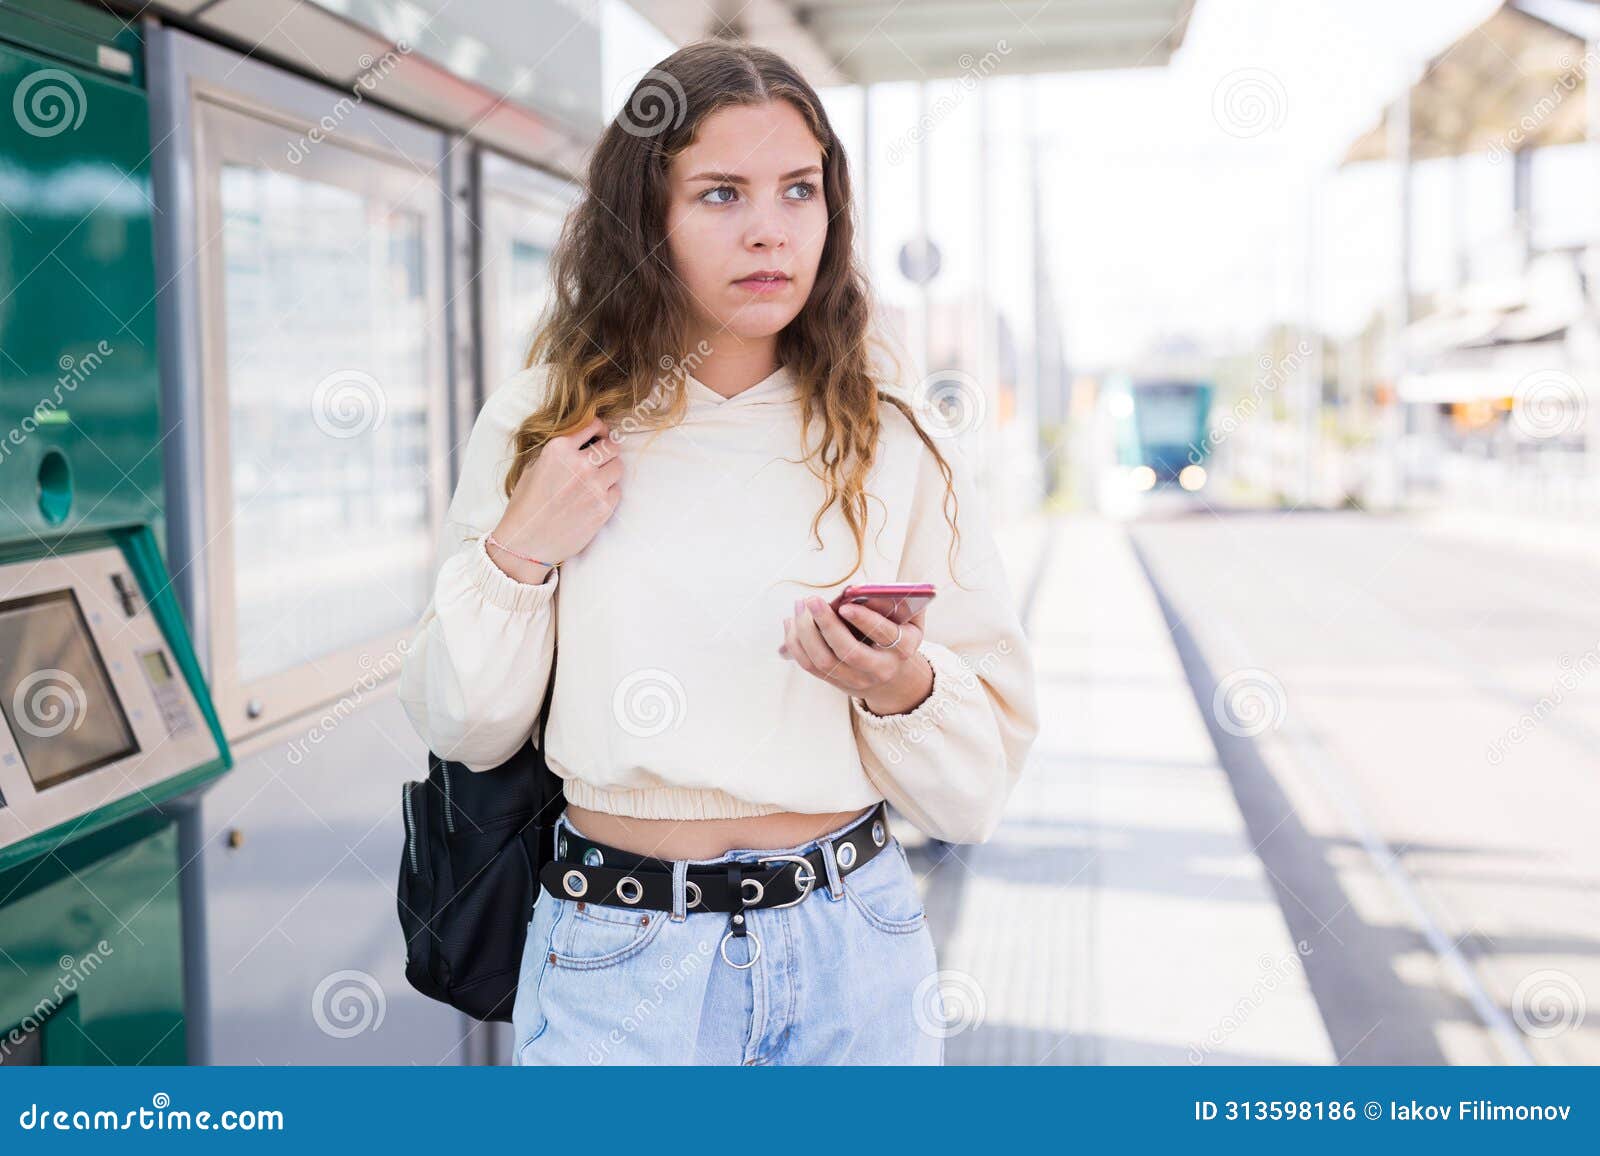 confident girl walking along a tram stop holds a mobile phone